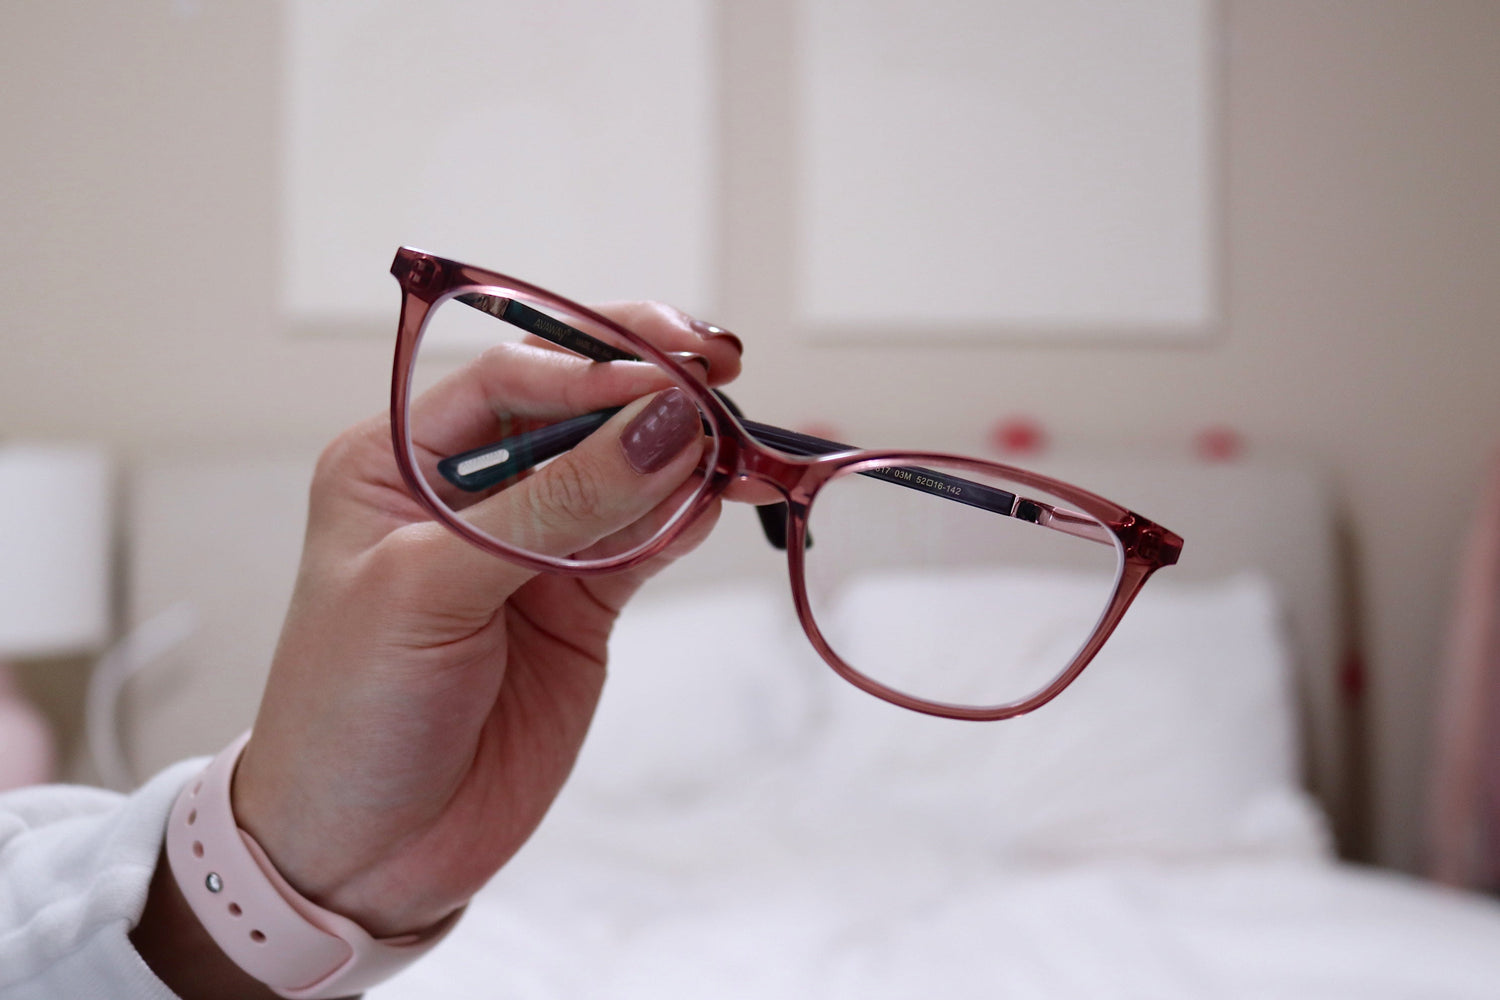 Is There A Difference Between Prescription Reading Glasses And Store Bought? | KOALAEYE OPTICAL